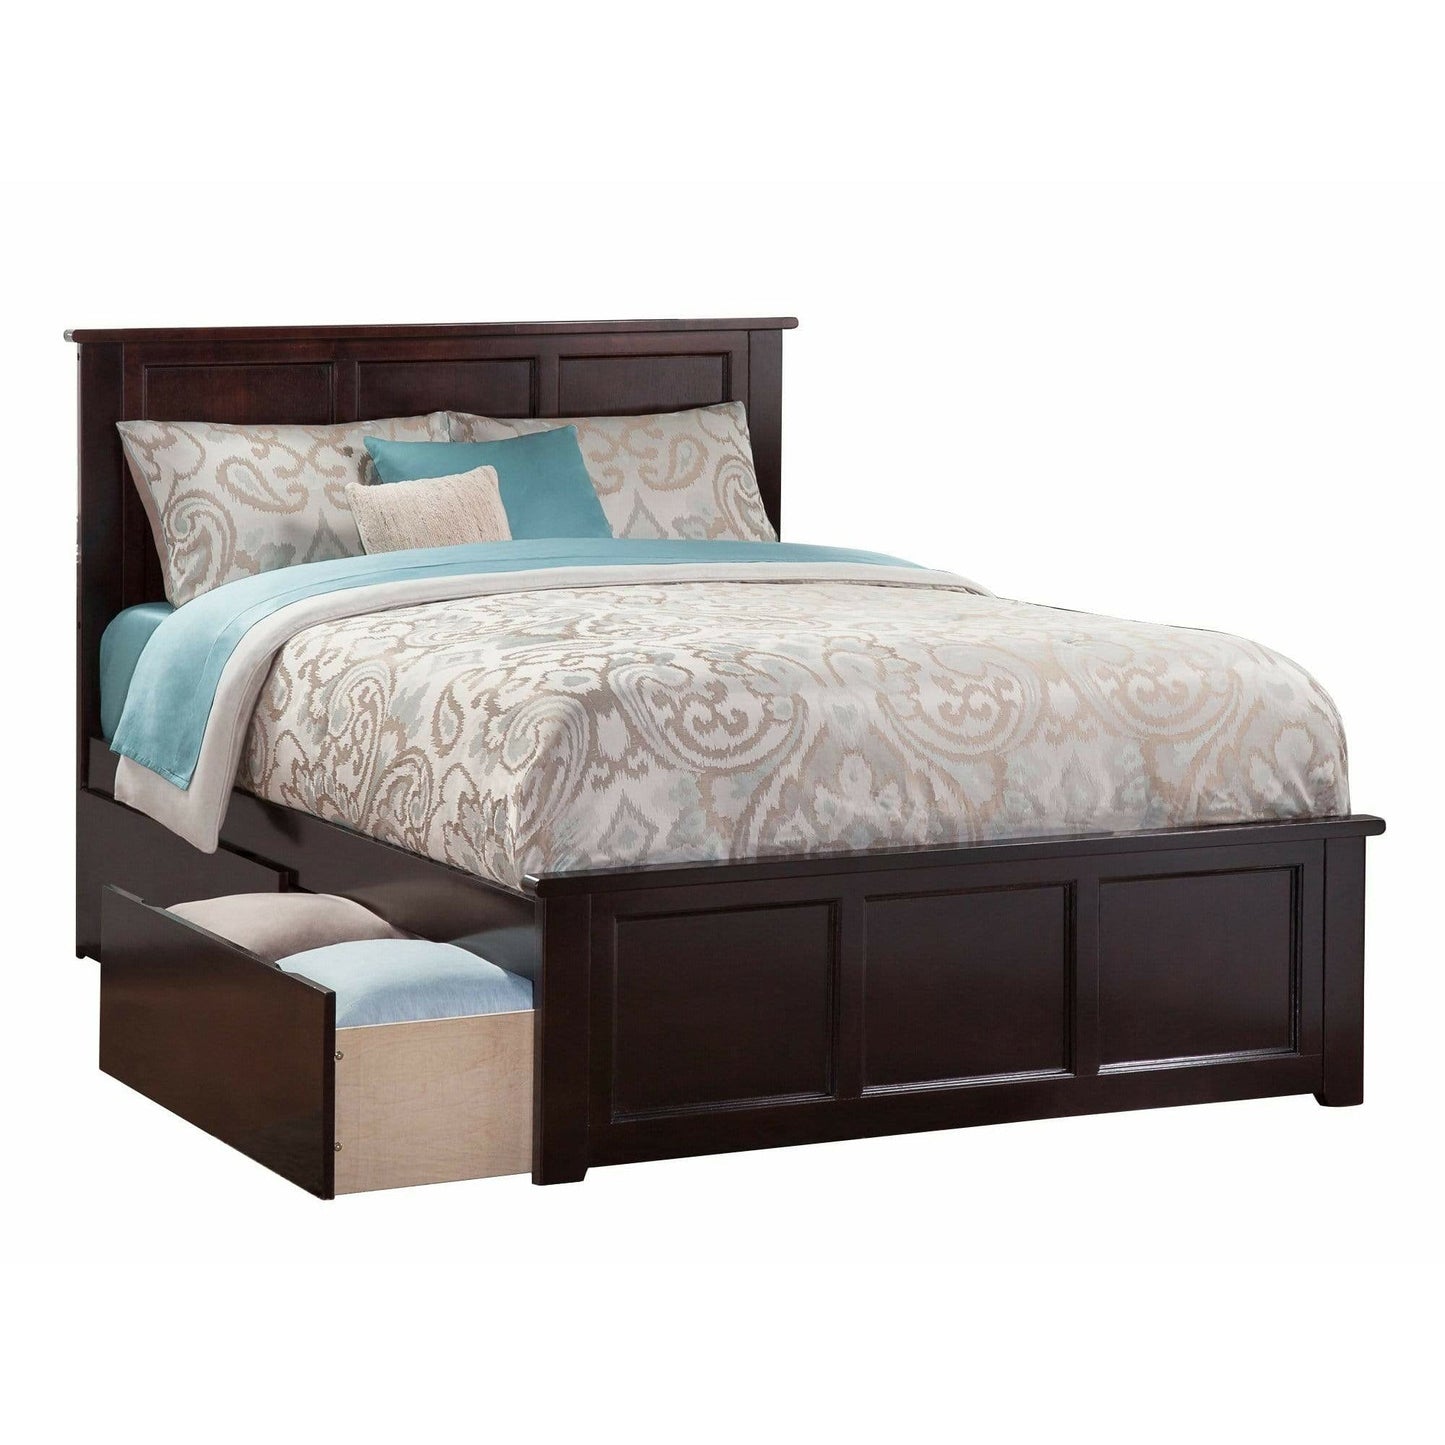 Atlantic Furniture Bed Espresso Madison Queen Platform Bed with Matching Foot Board with 2 Urban Bed Drawers in Espresso